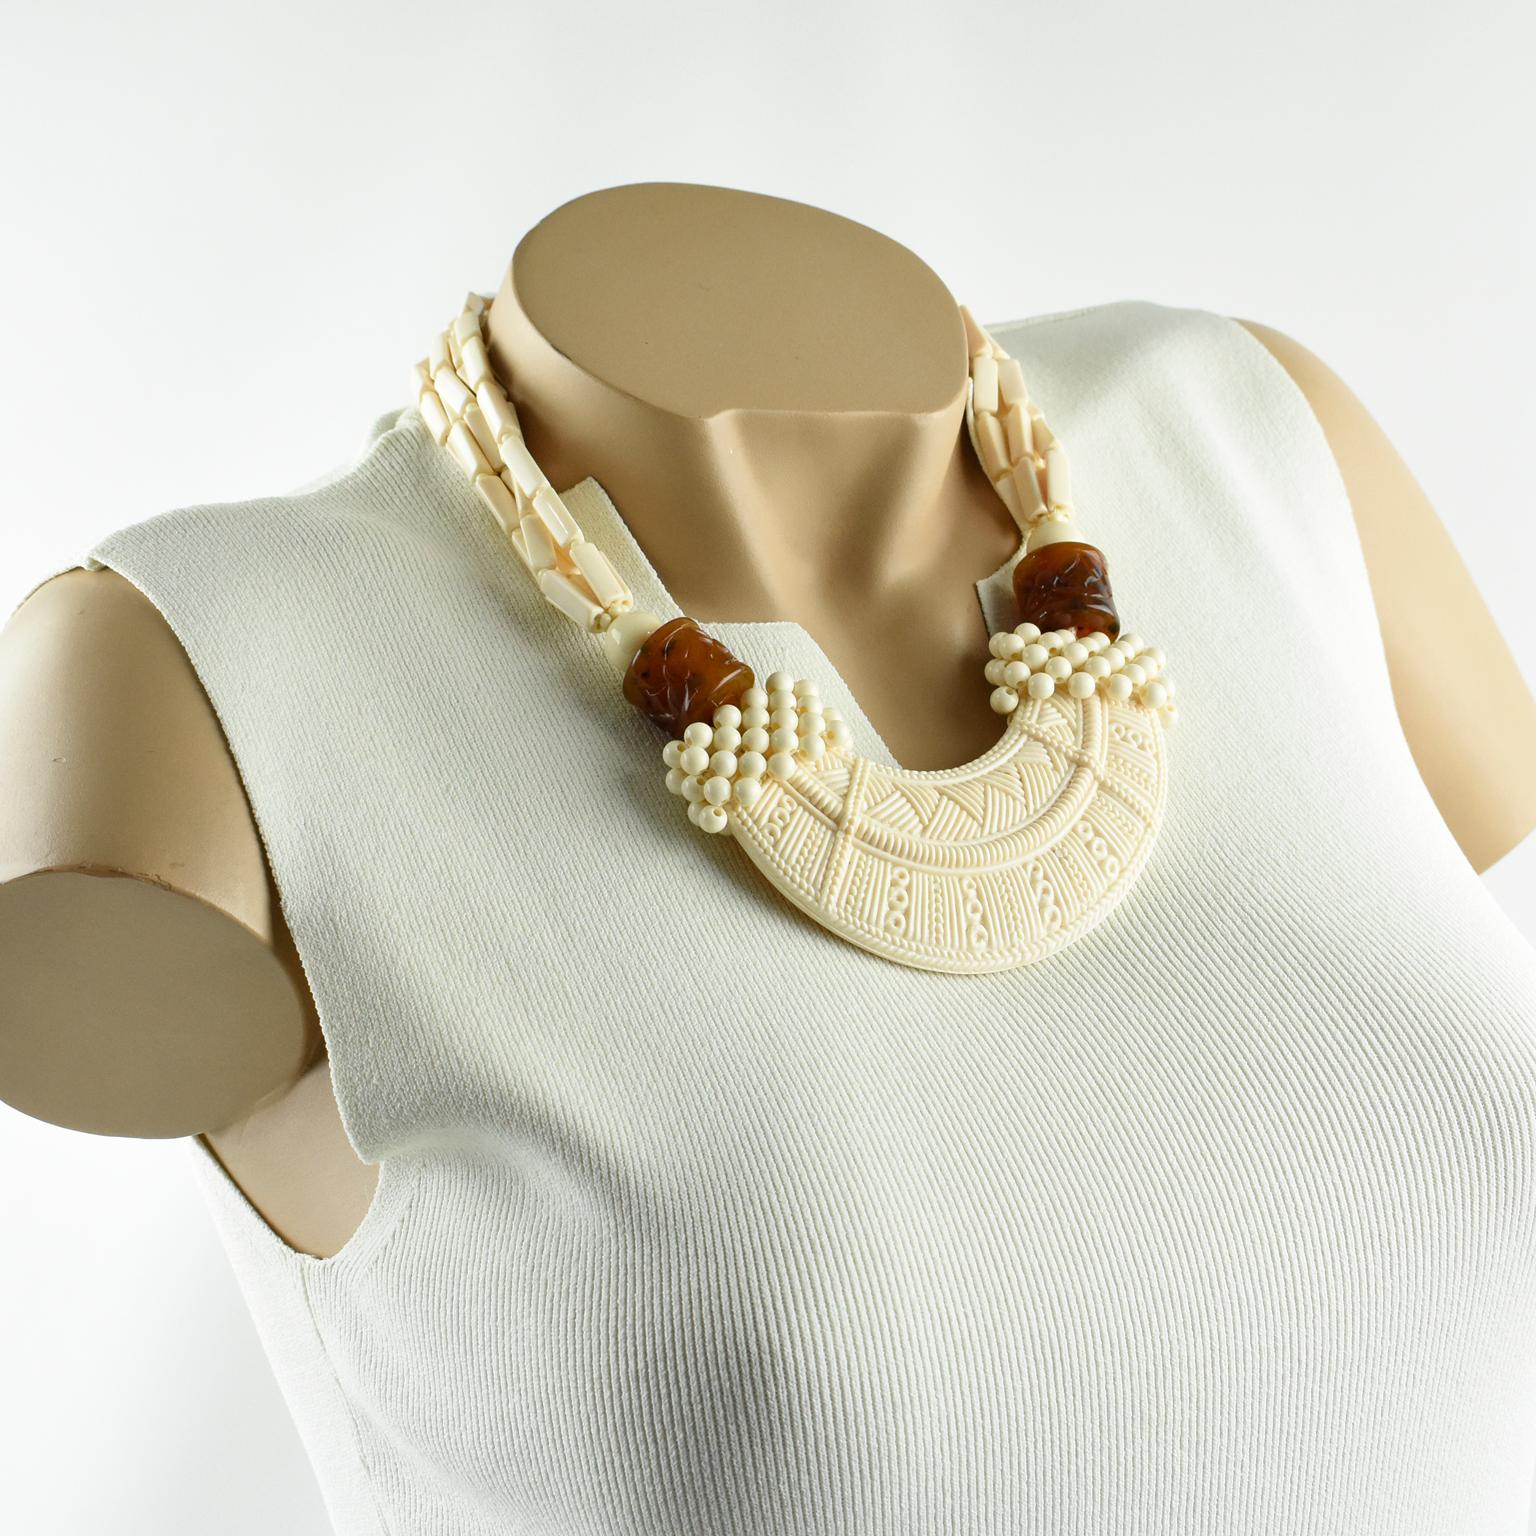 Elegant Angela Caputi, made in Italy resin choker beaded necklace. Working on off-white or ivory color with faux tortoise color contrast, this necklace has ethnic inspired design. Large front resin bib with African tribal carving compliment with